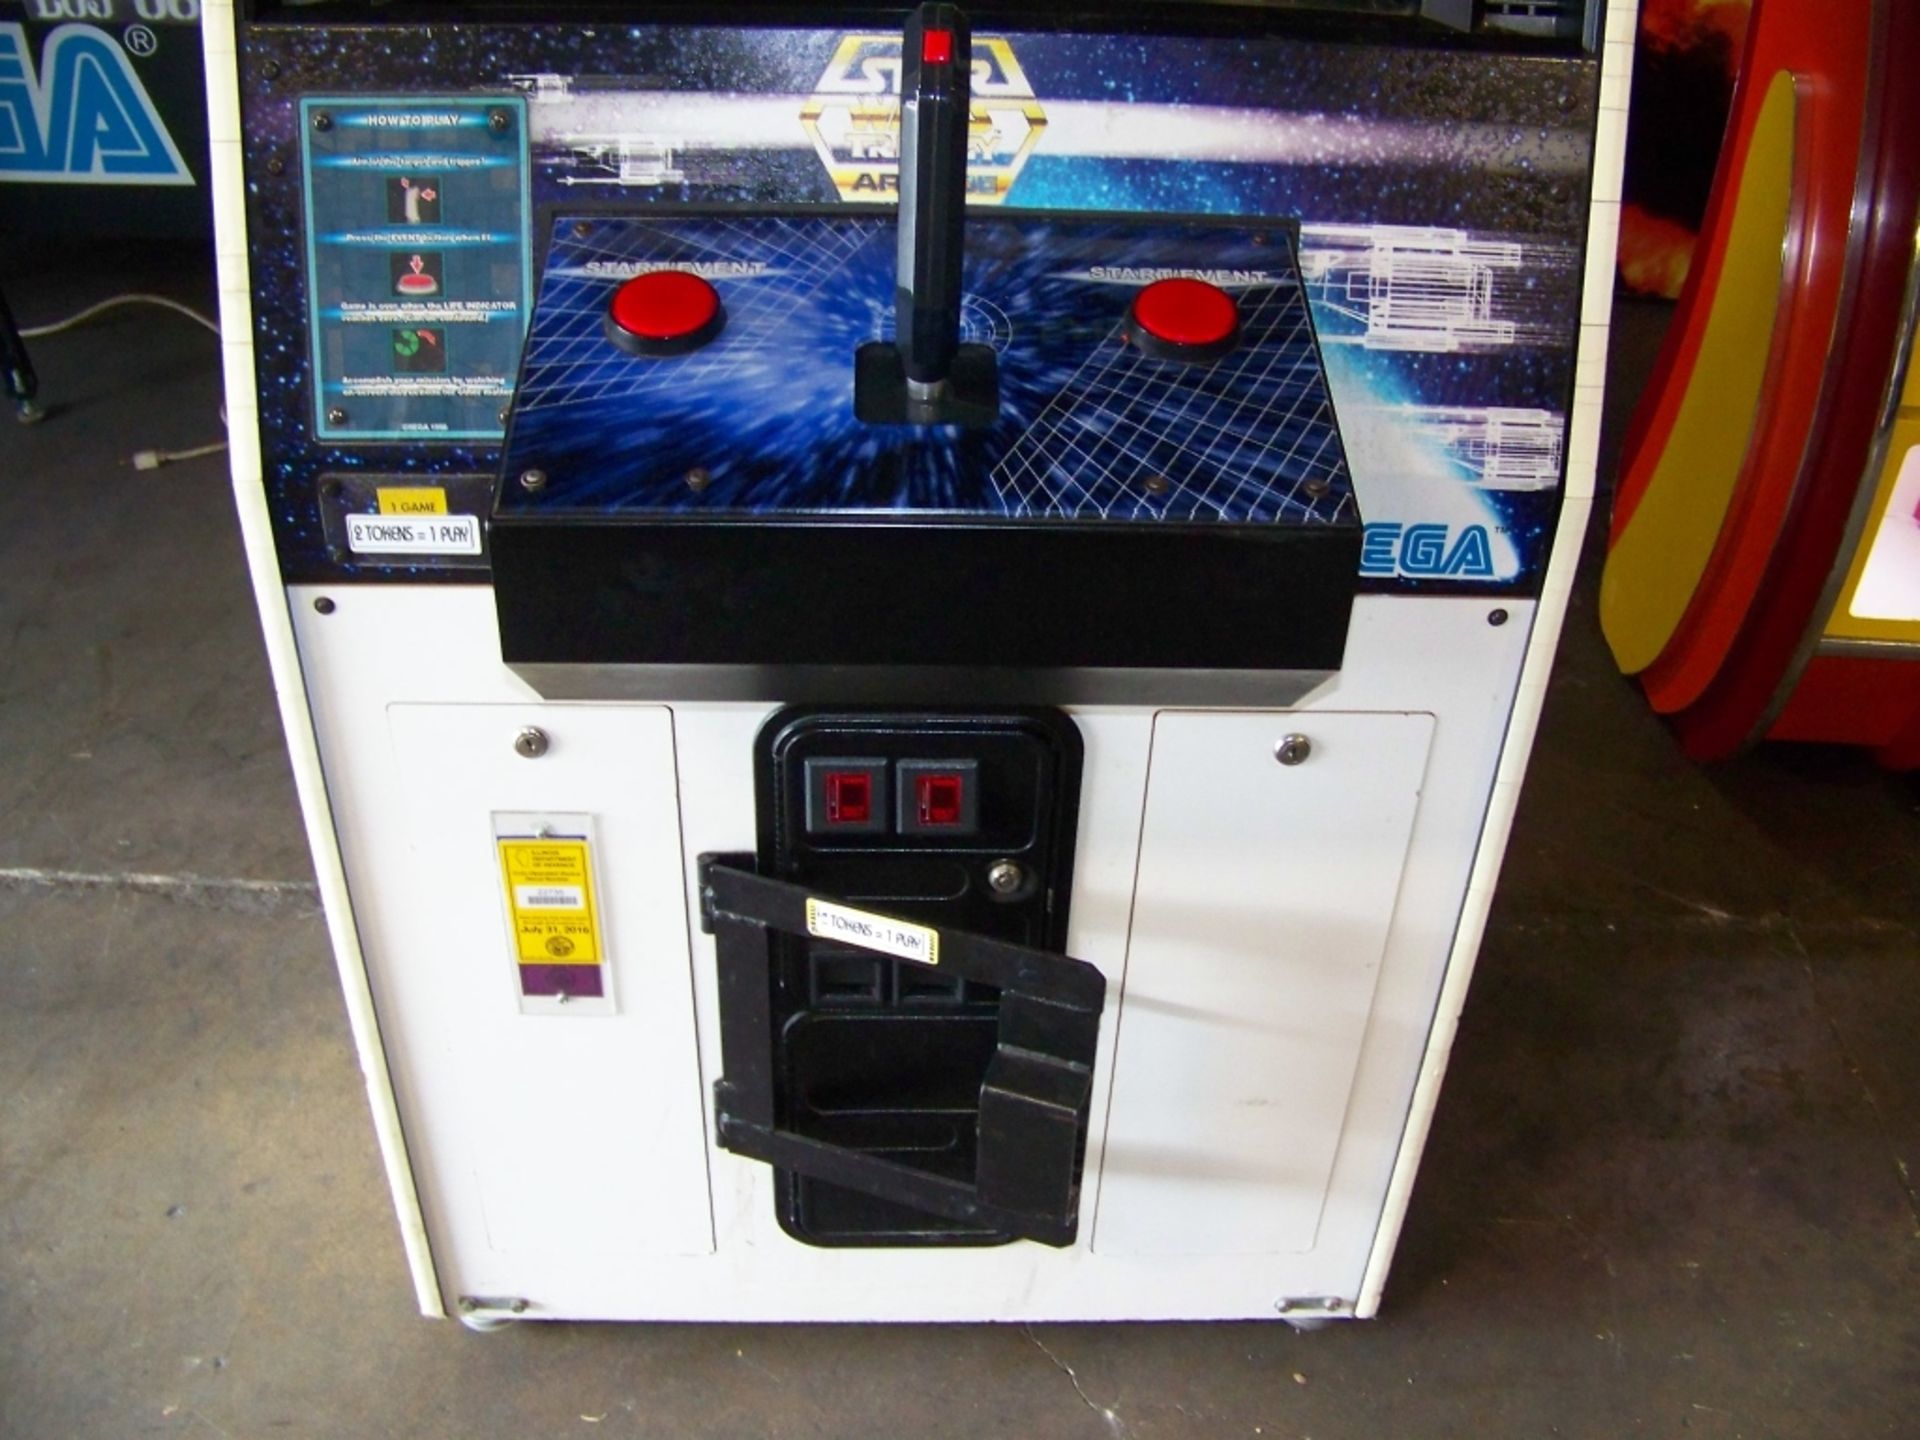 STAR WARS TRILOGY UPRIGHT ARCADE GAME SEGA Item is in used condition. Evidence of wear and - Image 4 of 5